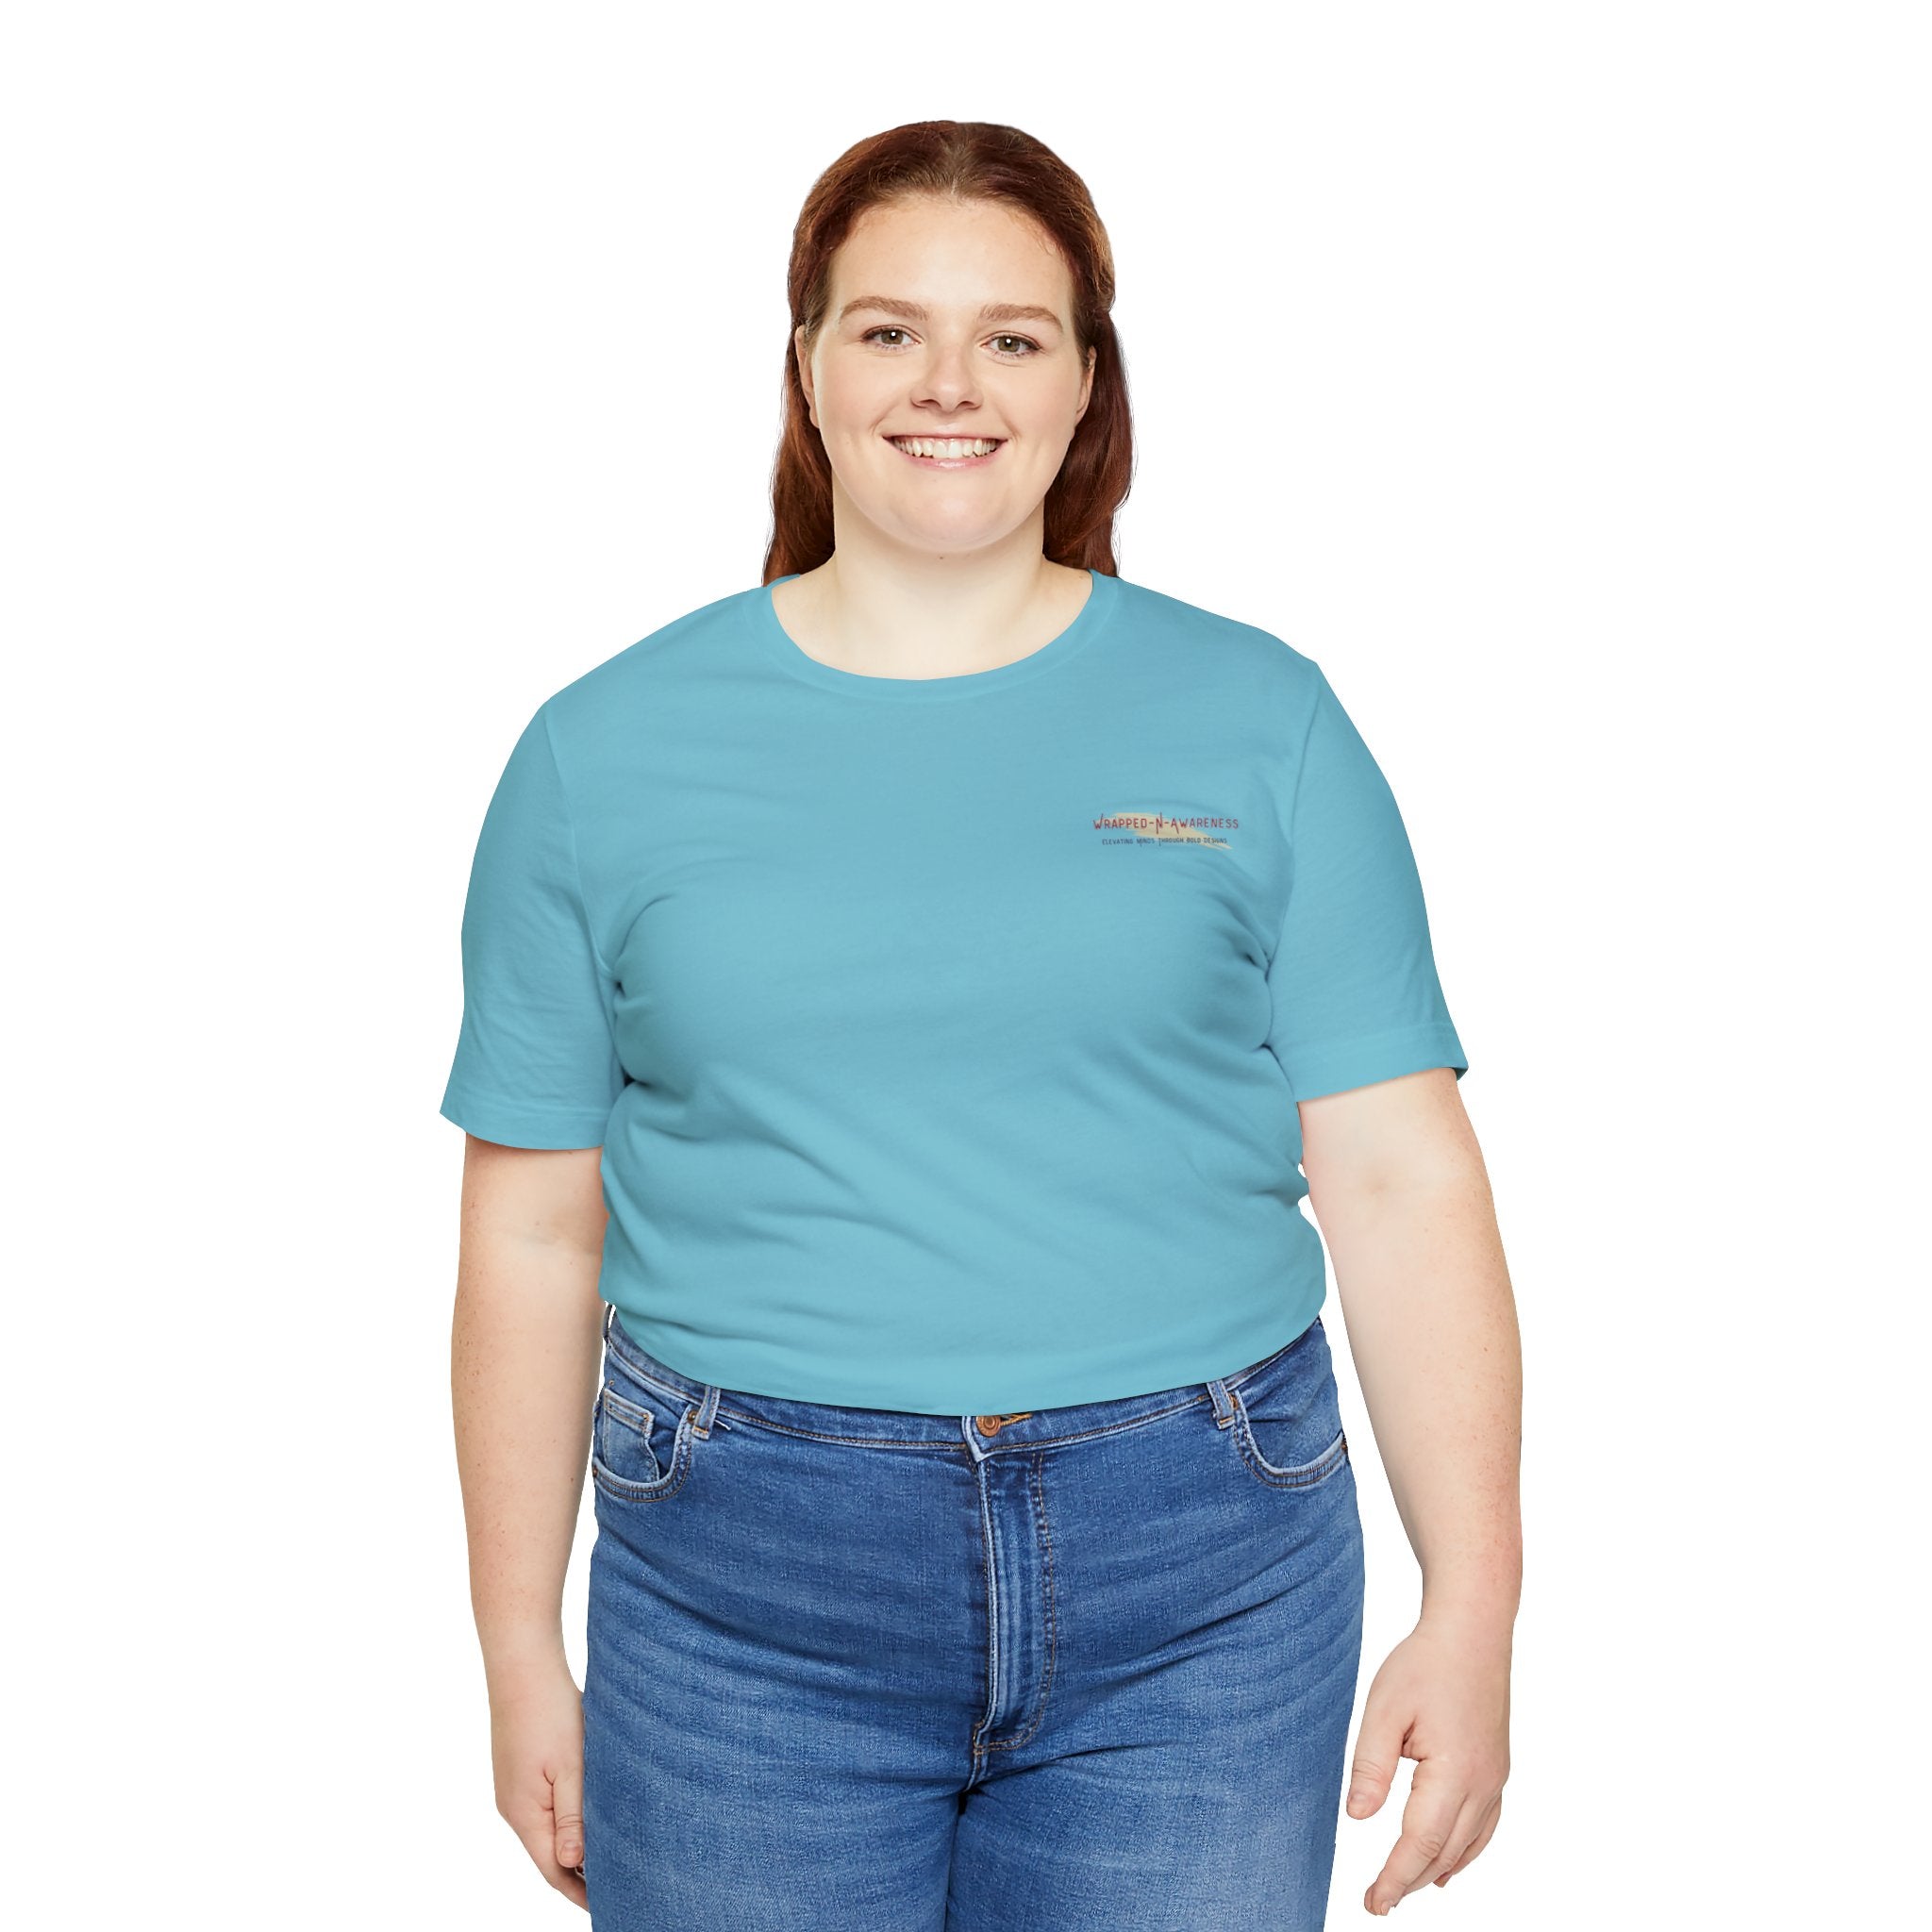 Hope Conquers Fear Jersey Tee - Bella+Canvas 3001 Heather Ice Blue Airlume Cotton Bella+Canvas 3001 Crew Neckline Jersey Short Sleeve Lightweight Fabric Mental Health Support Retail Fit Tear-away Label Tee Unisex Tee T-Shirt 10581367702844532486_2048 Printify